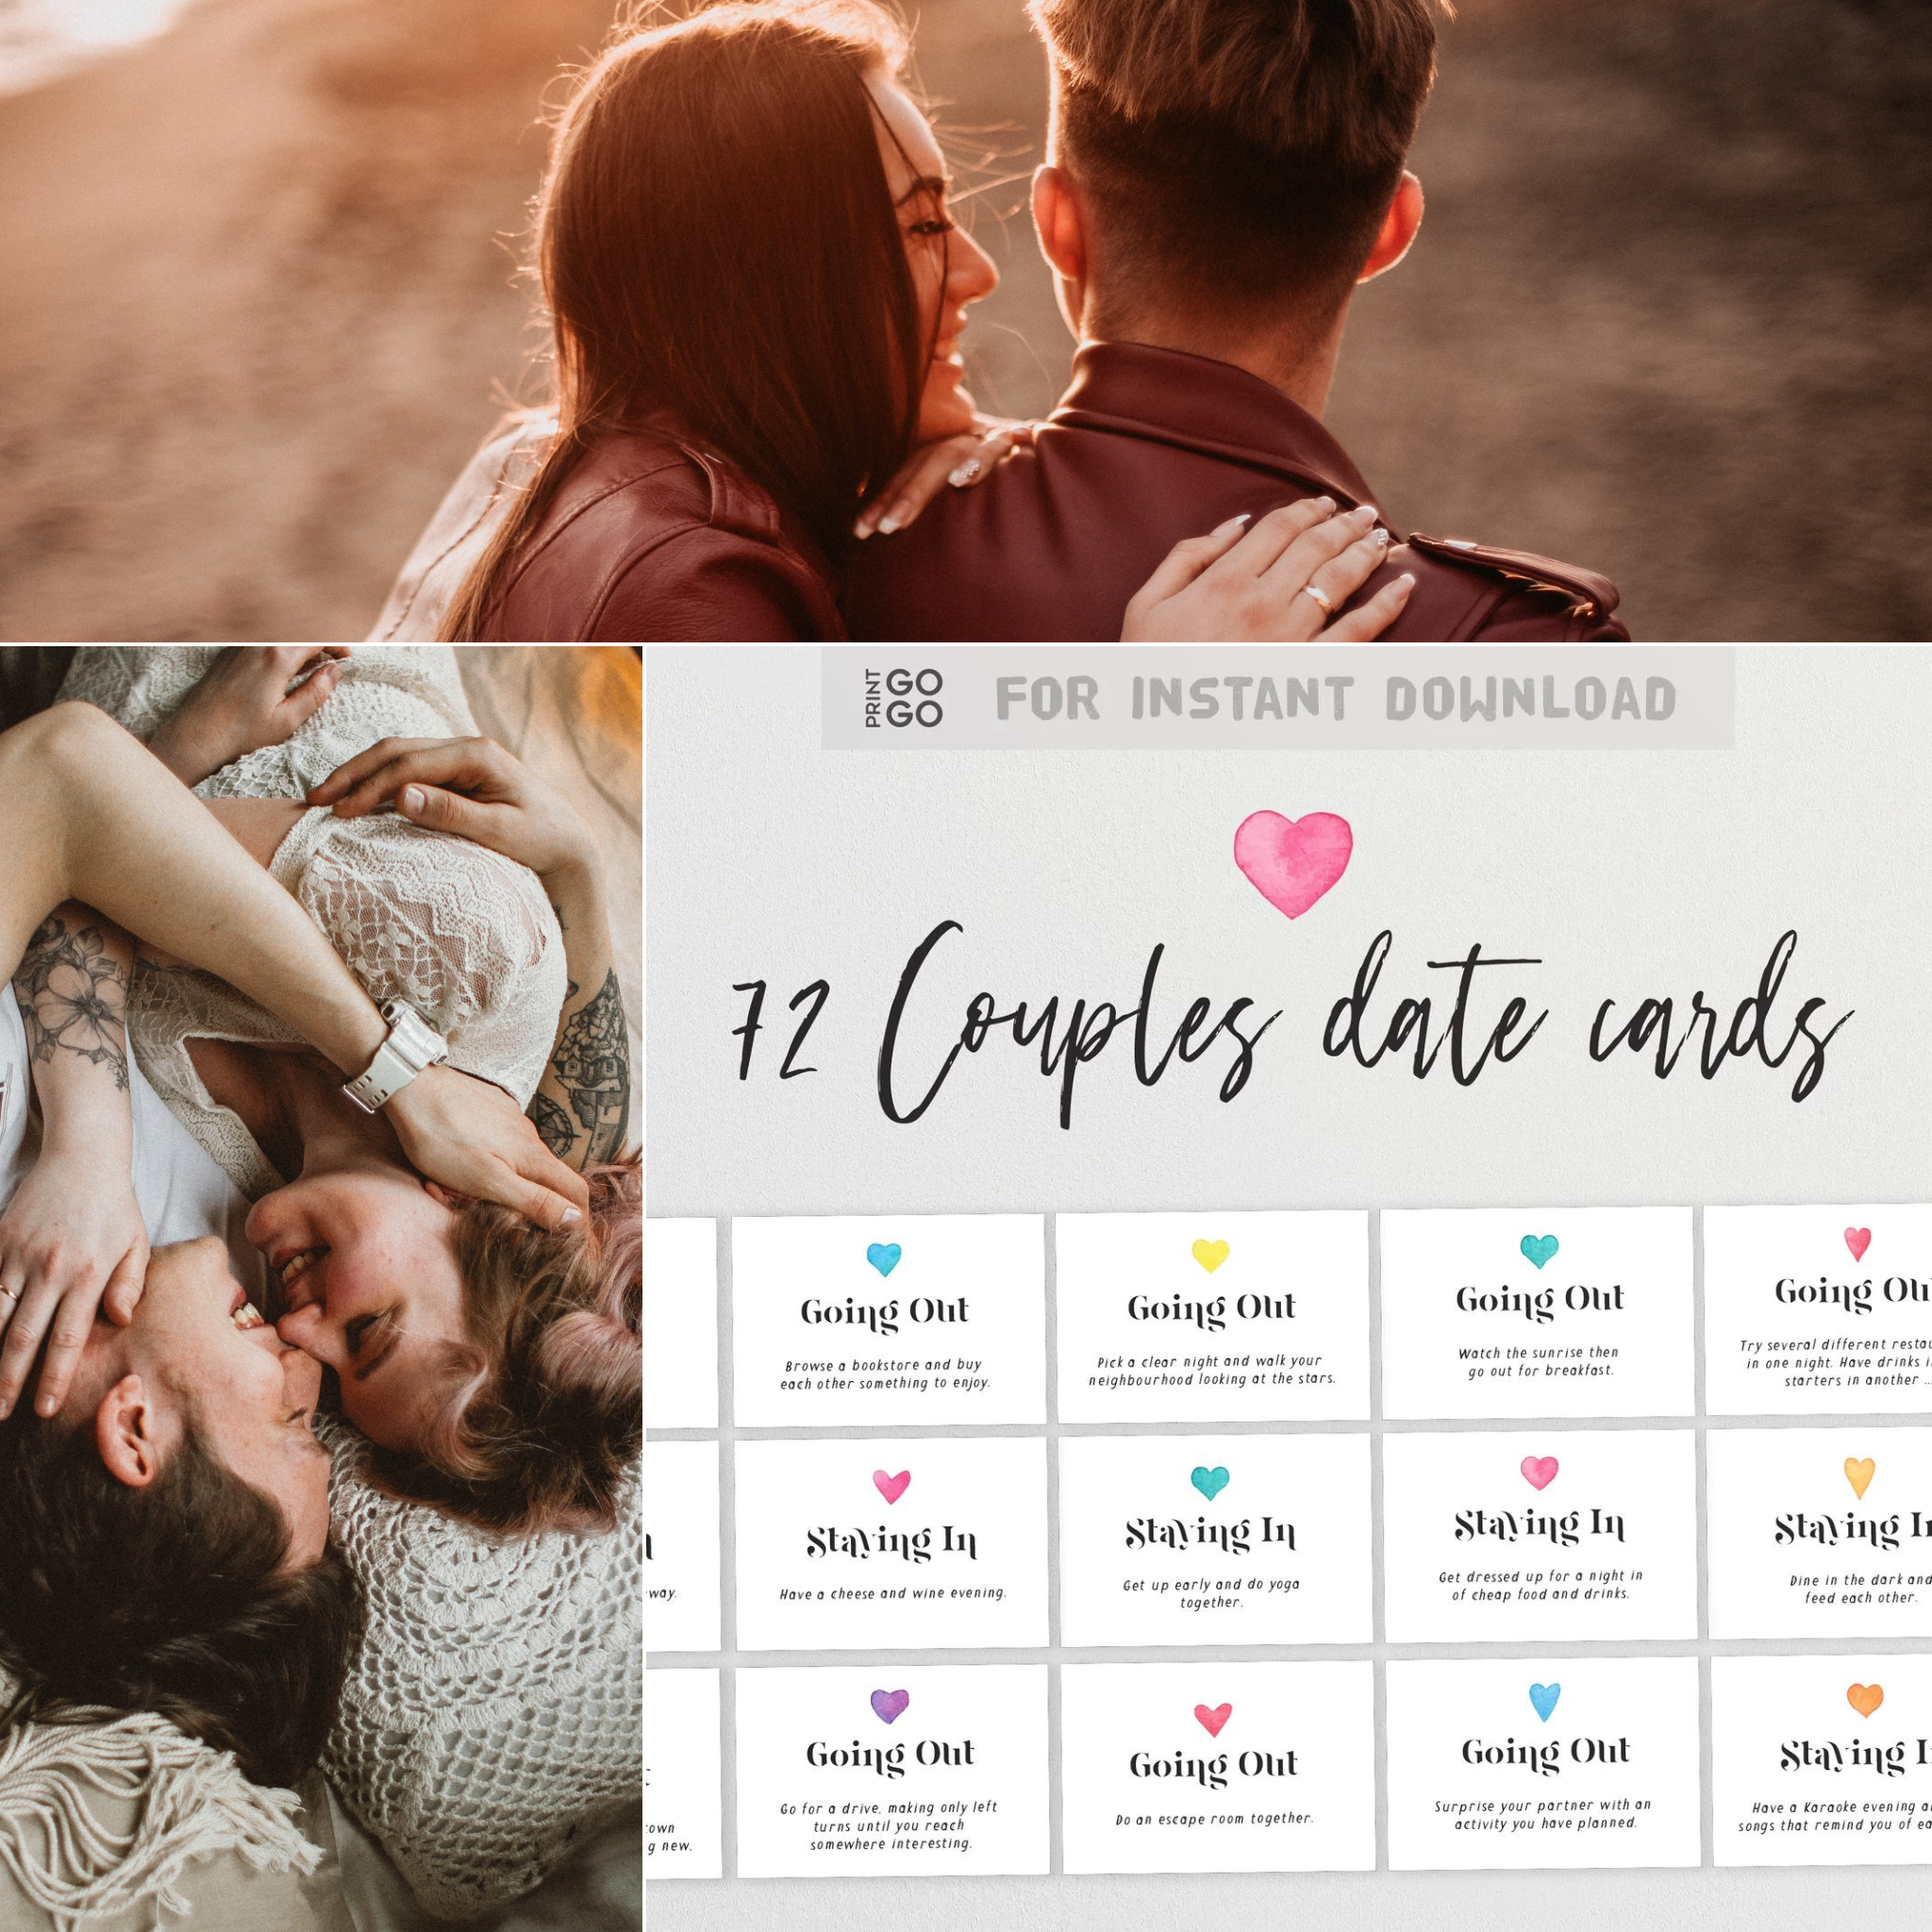 Getting Cozy: The Ultimate Couples Date Cards